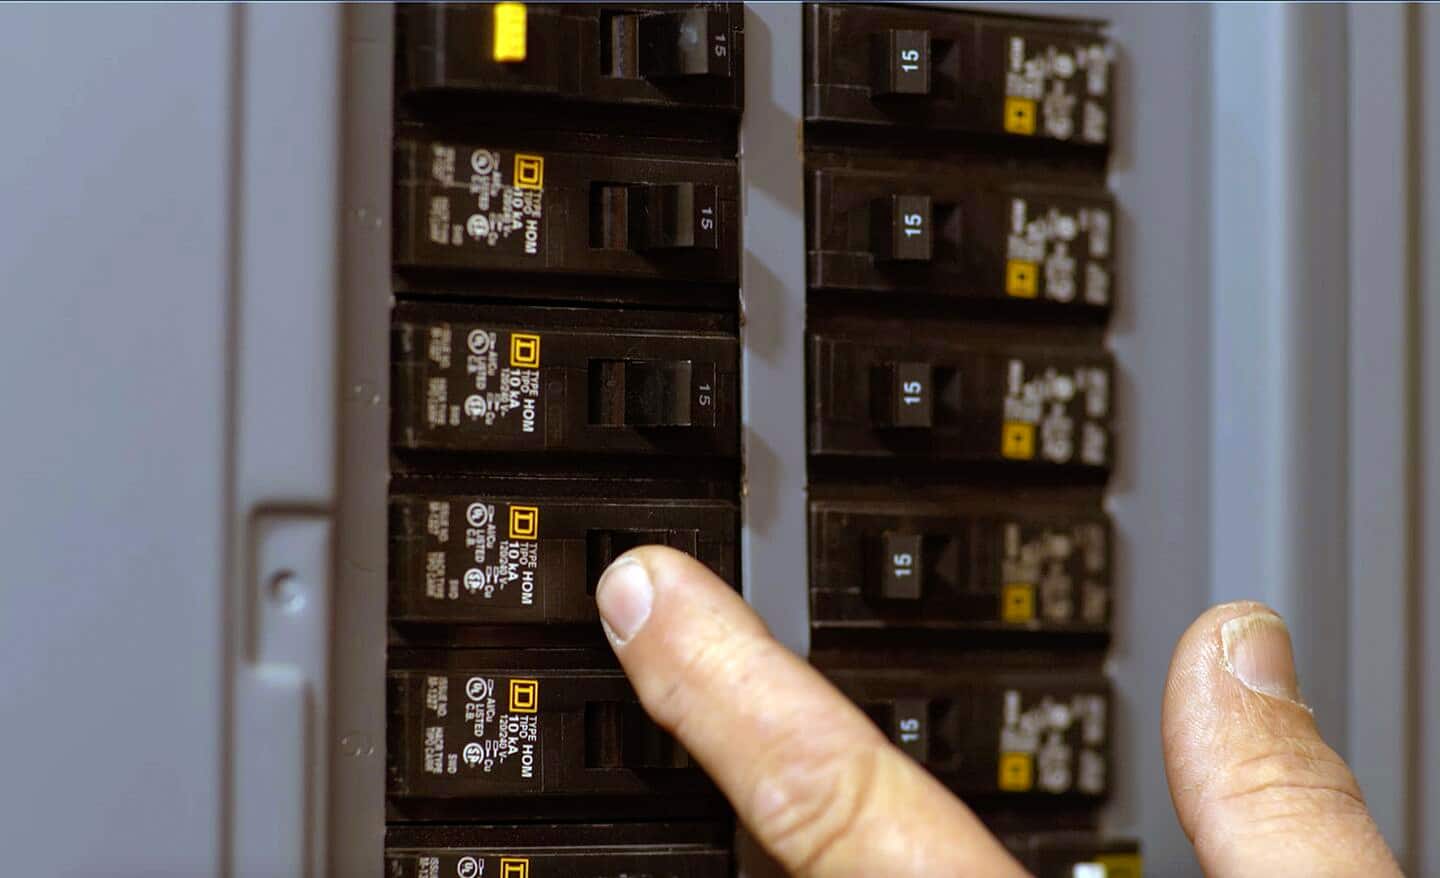 A person resets a circuit breaker in an electrical panel.